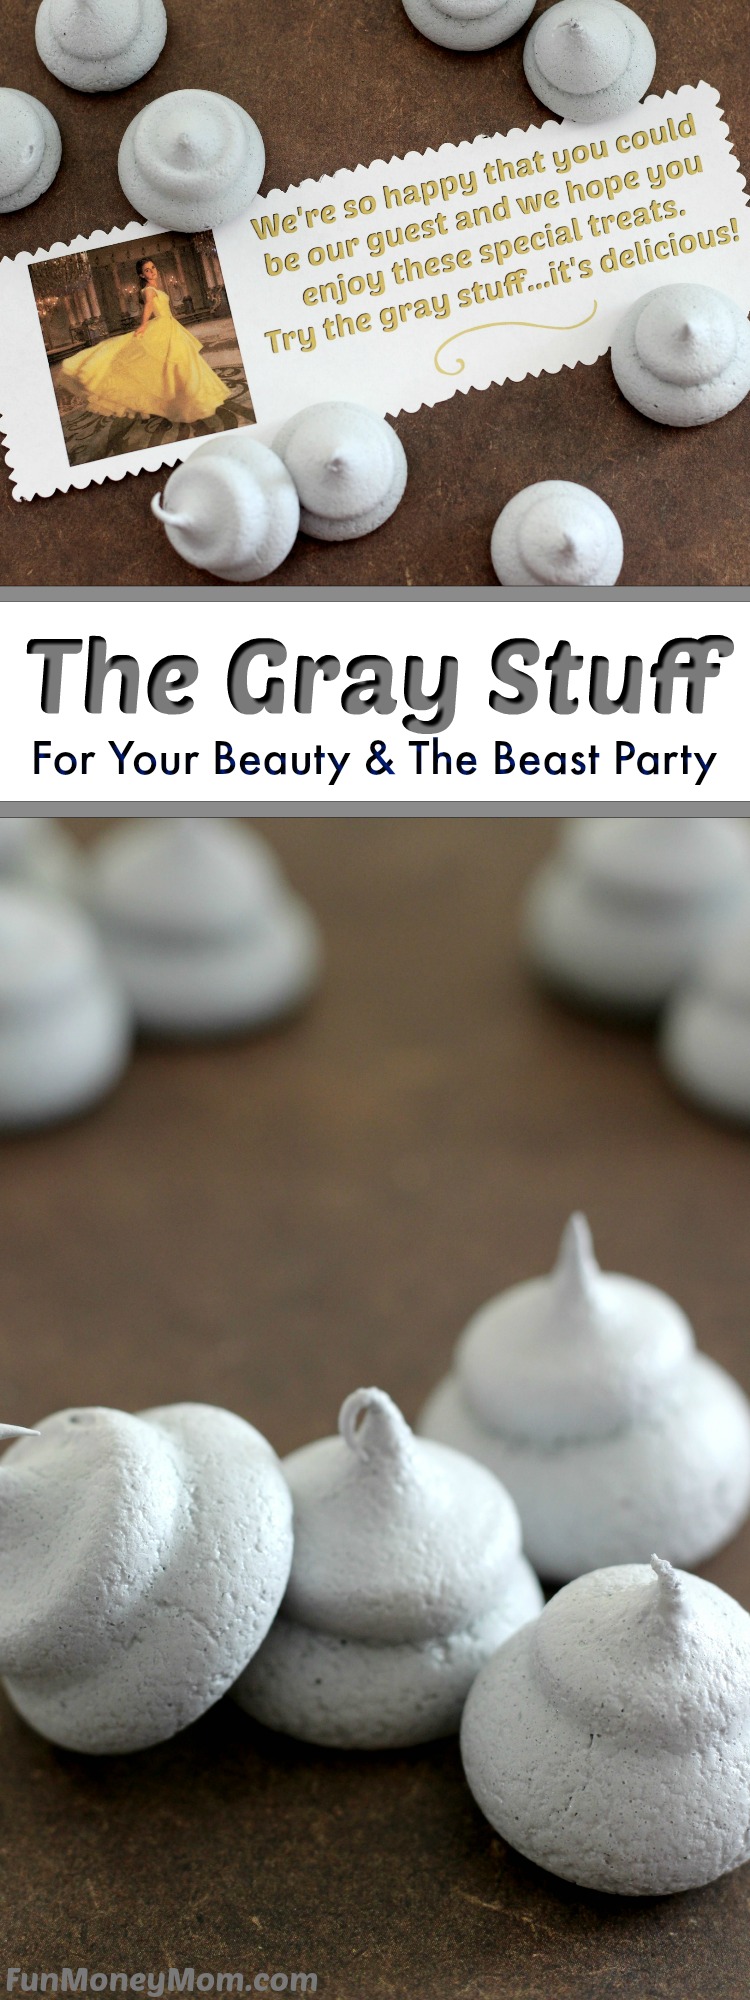 The Gray Stuff - If you're having a Beauty And The Beast Party, you have to have the gray stuff! These melt in your mouth meringue cookies are the perfect sweet treat for a birthday party!